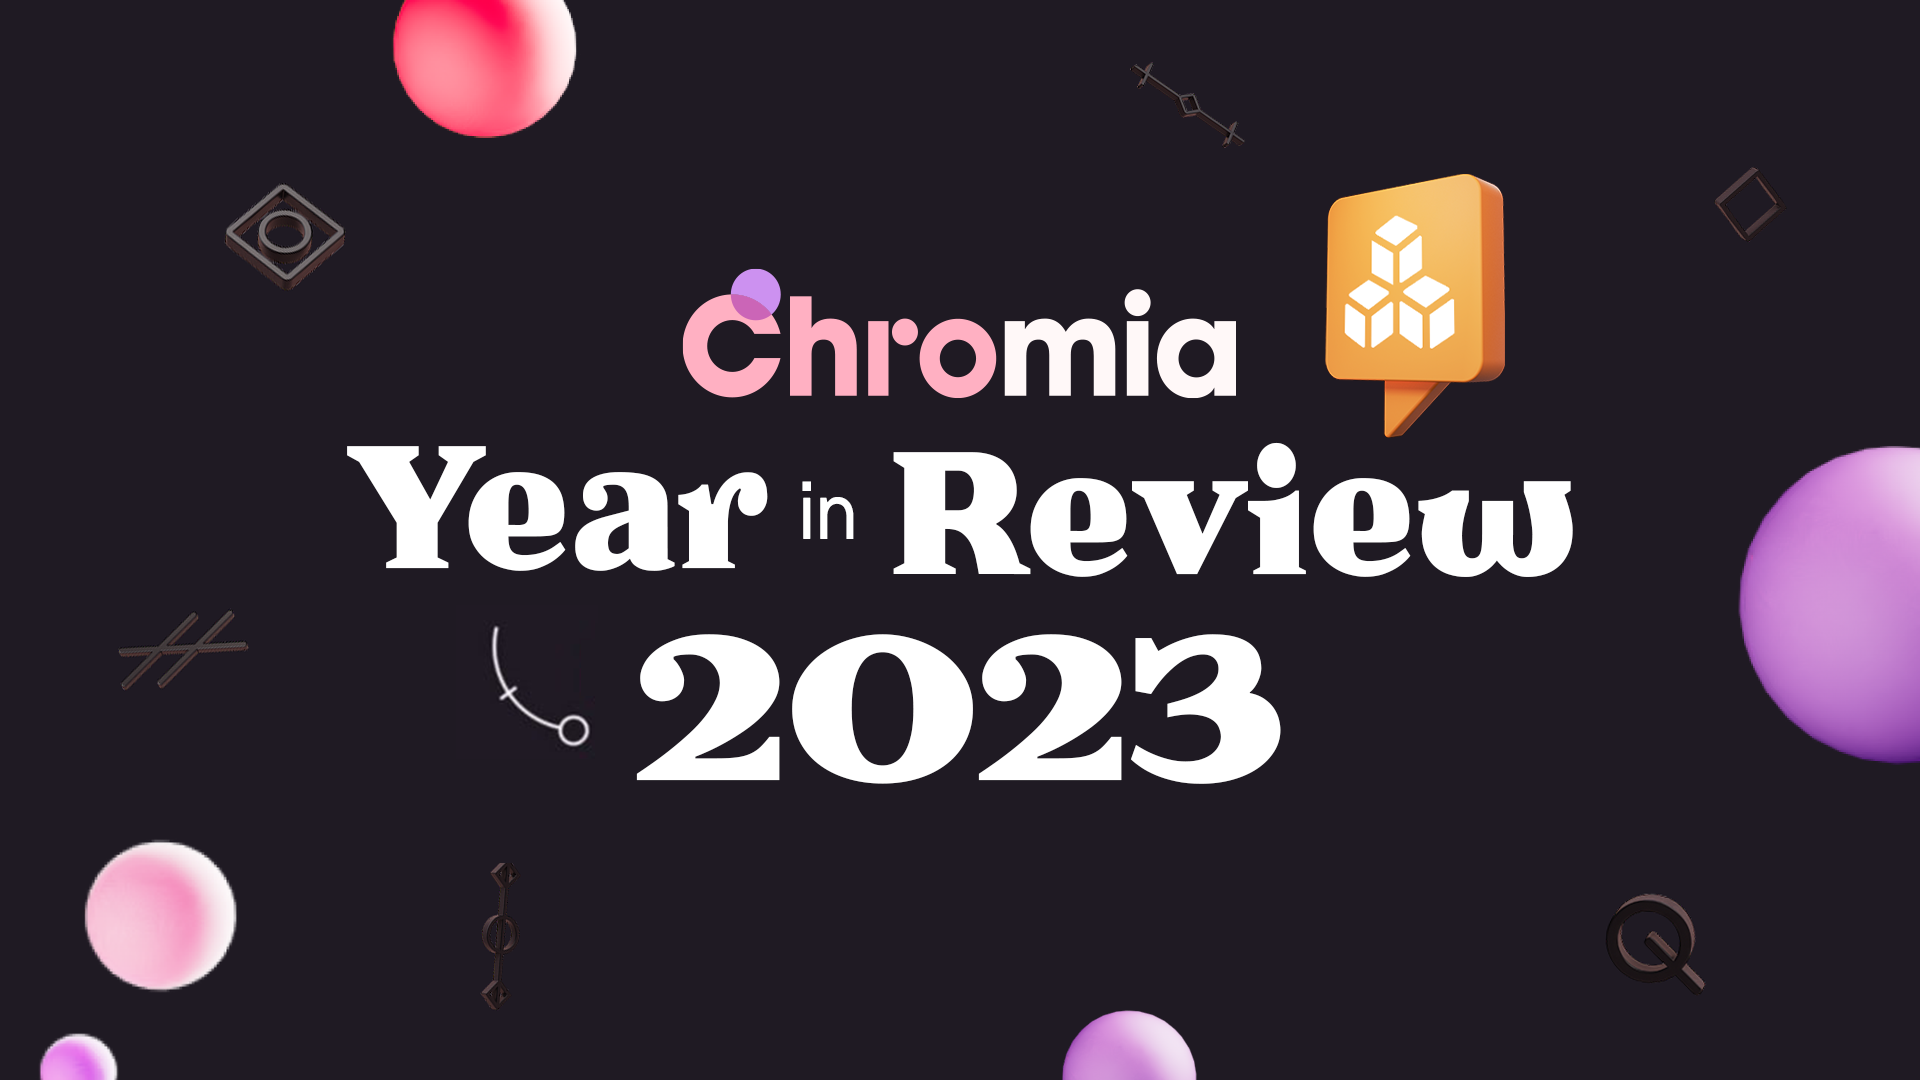 Chromia Year in Review: 2023